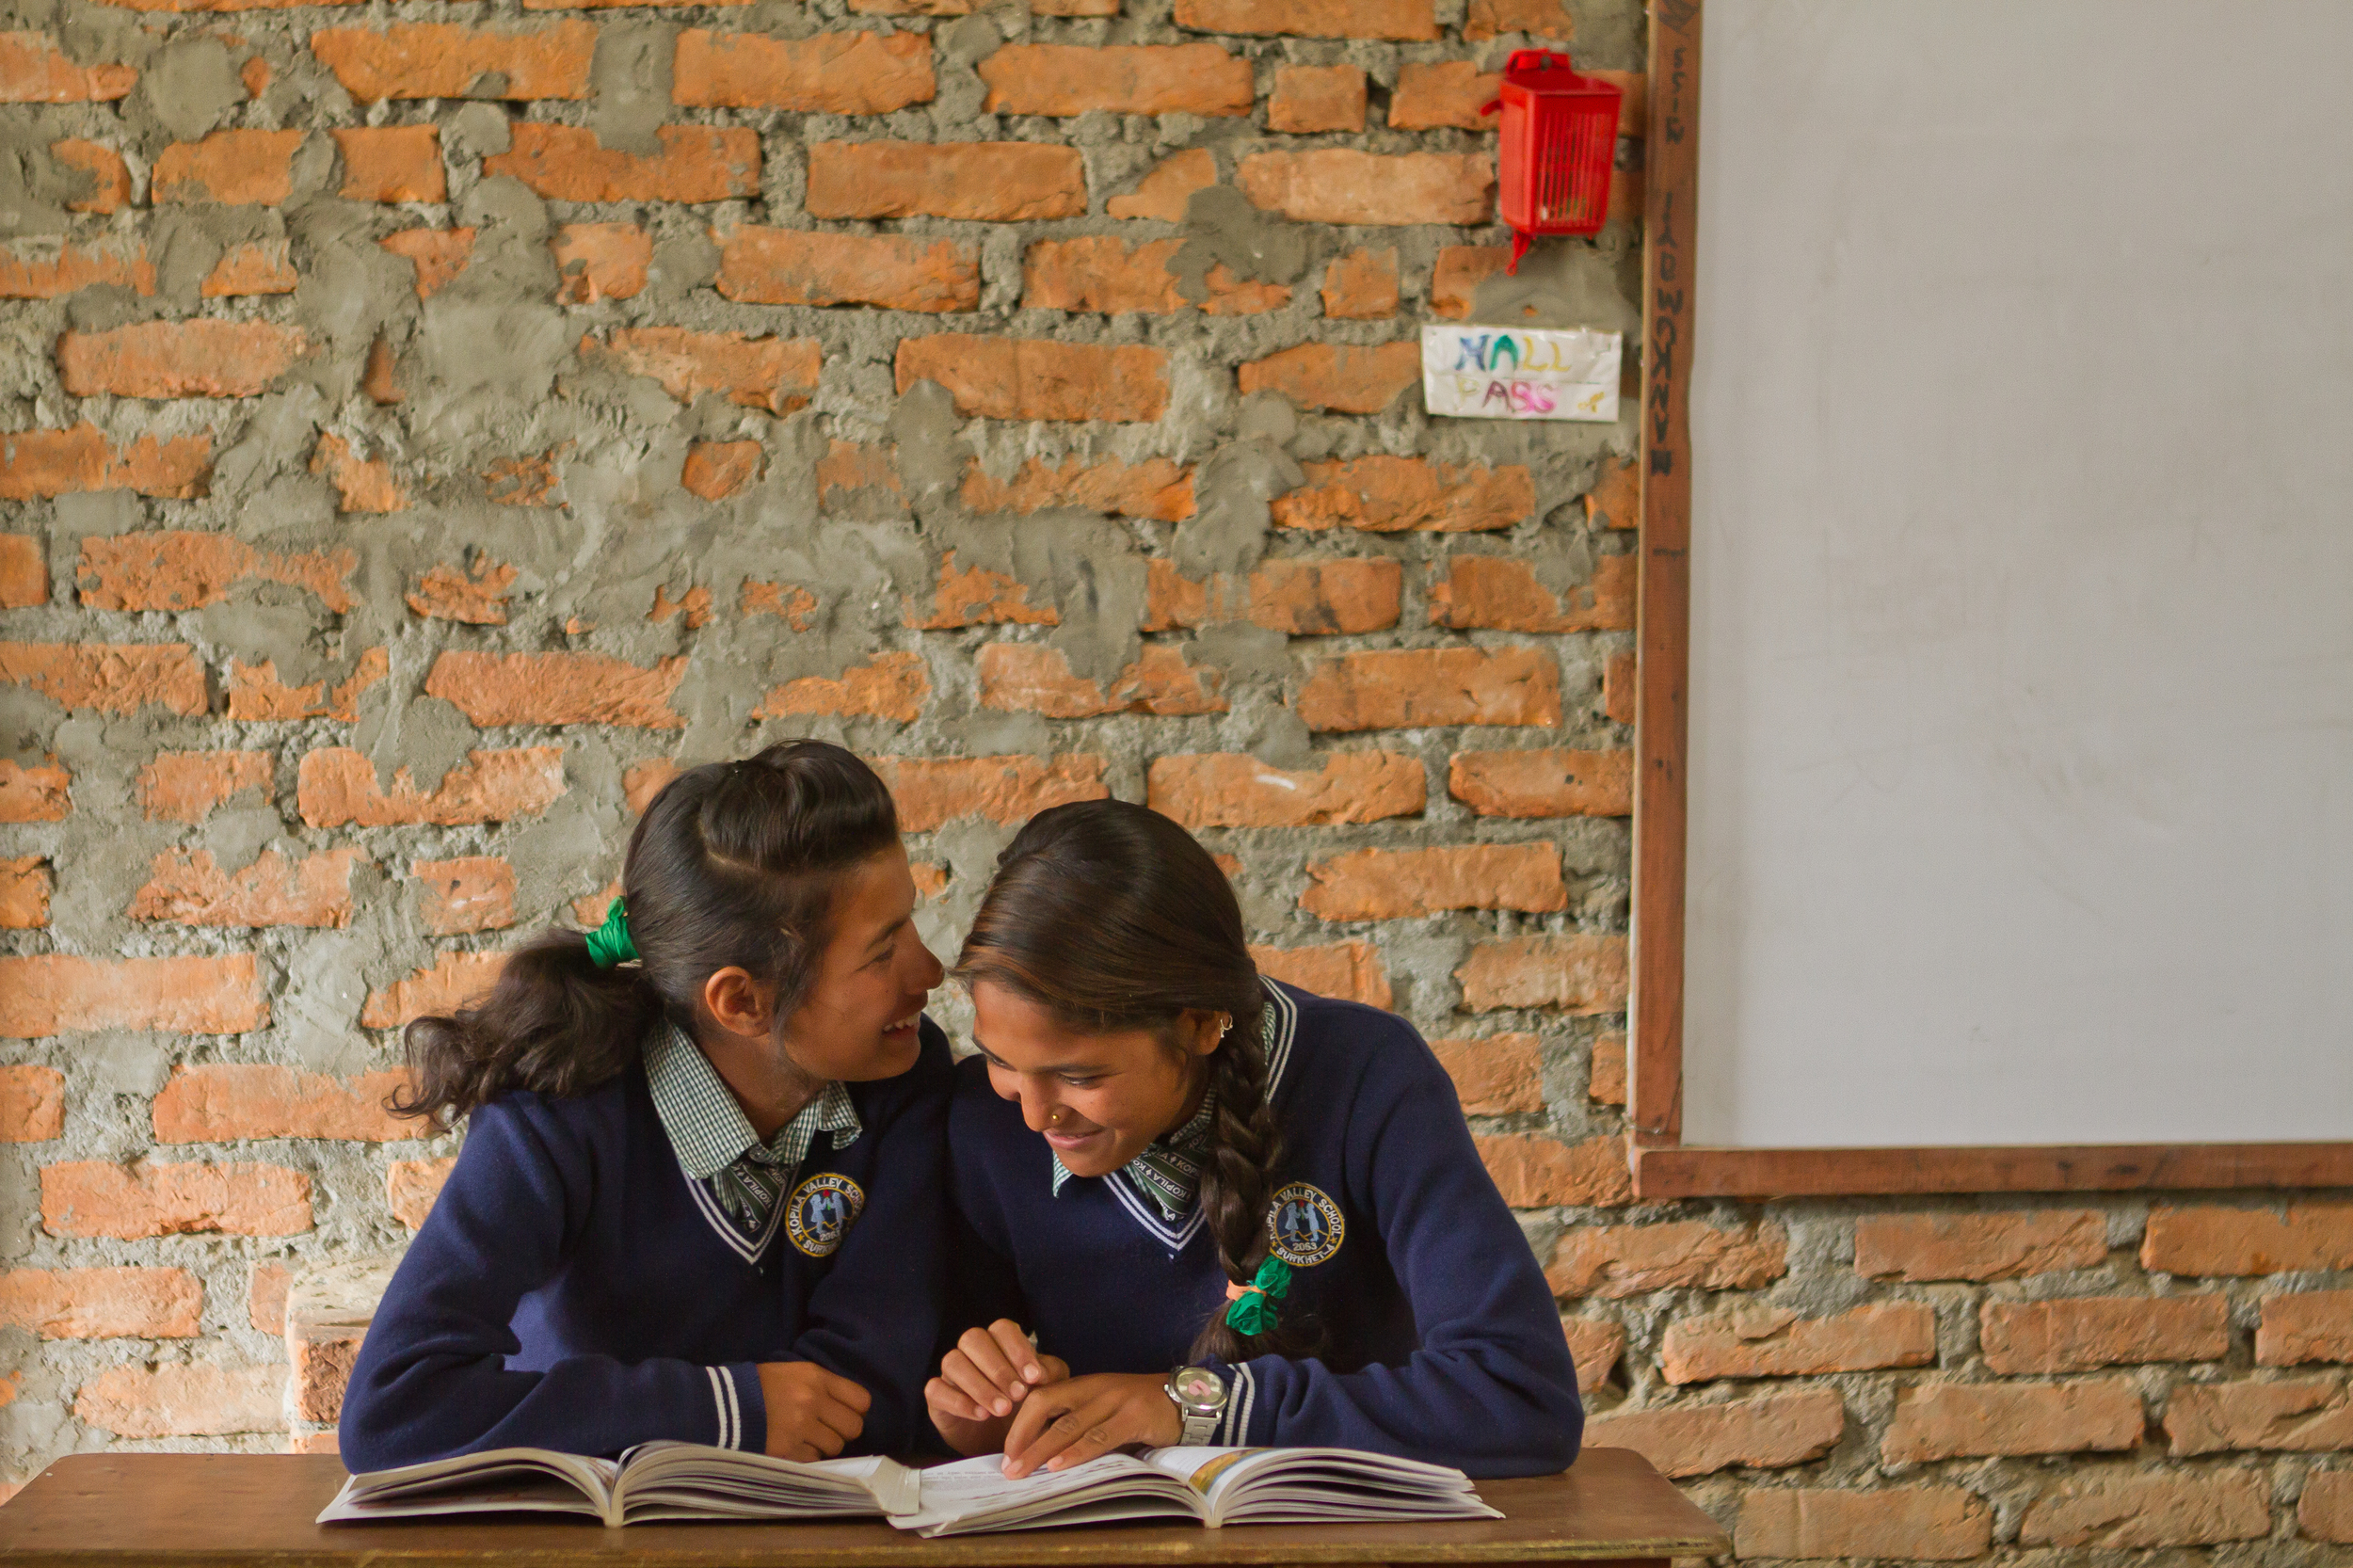  She's the First Scholars Kamala S. and Shanti S. whisper to one another at school in Nepal, March 2015. (photo by Kate Lord) 